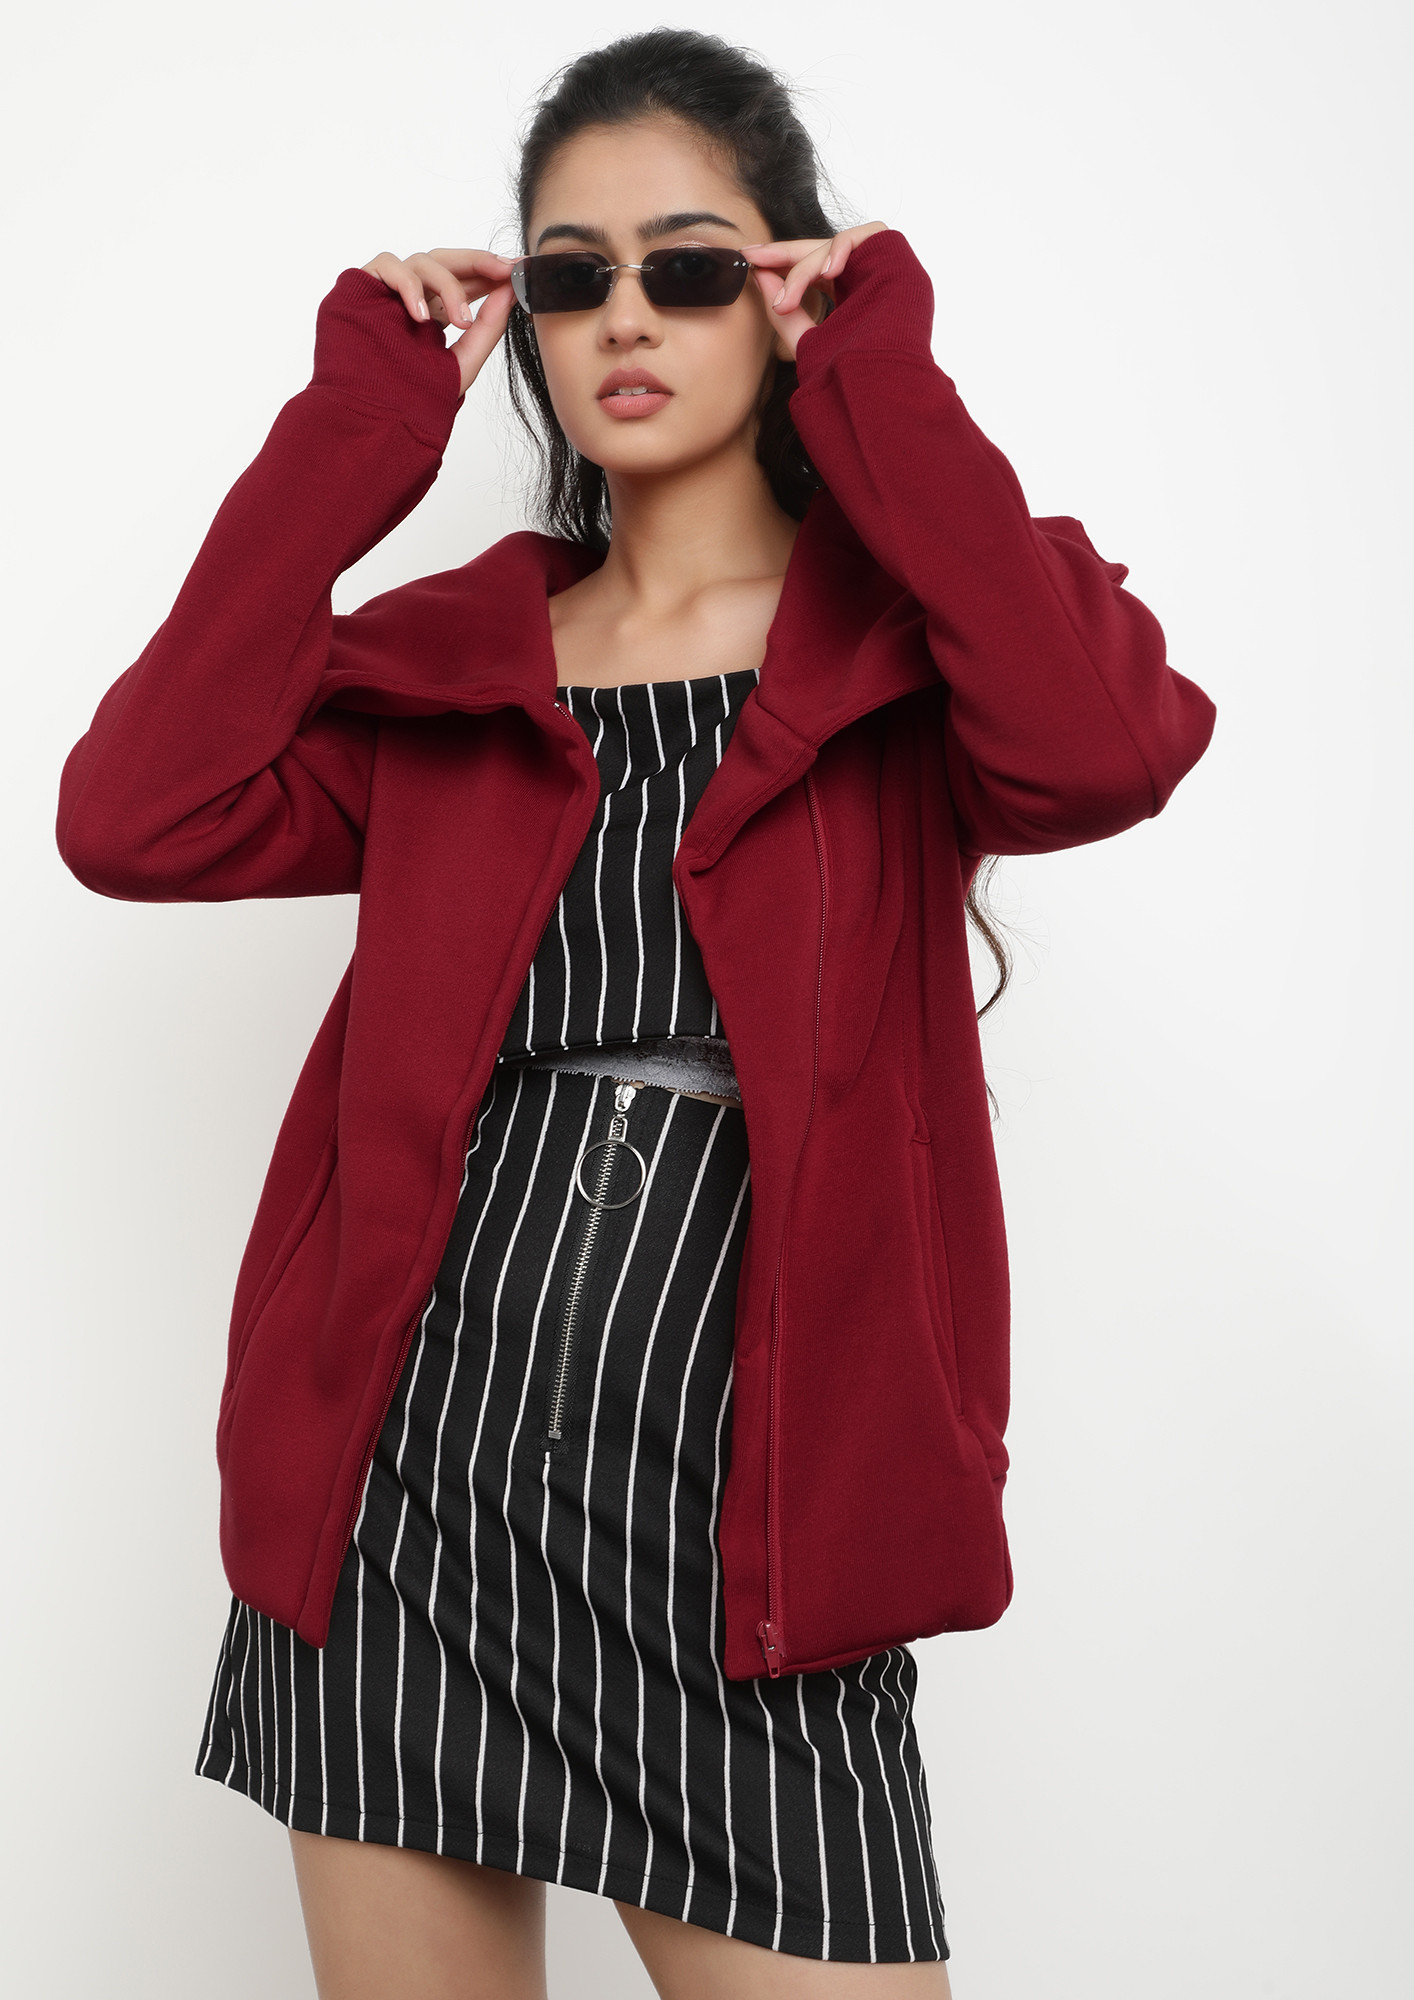 JUST A COSY FEEL WINE RED JACKET